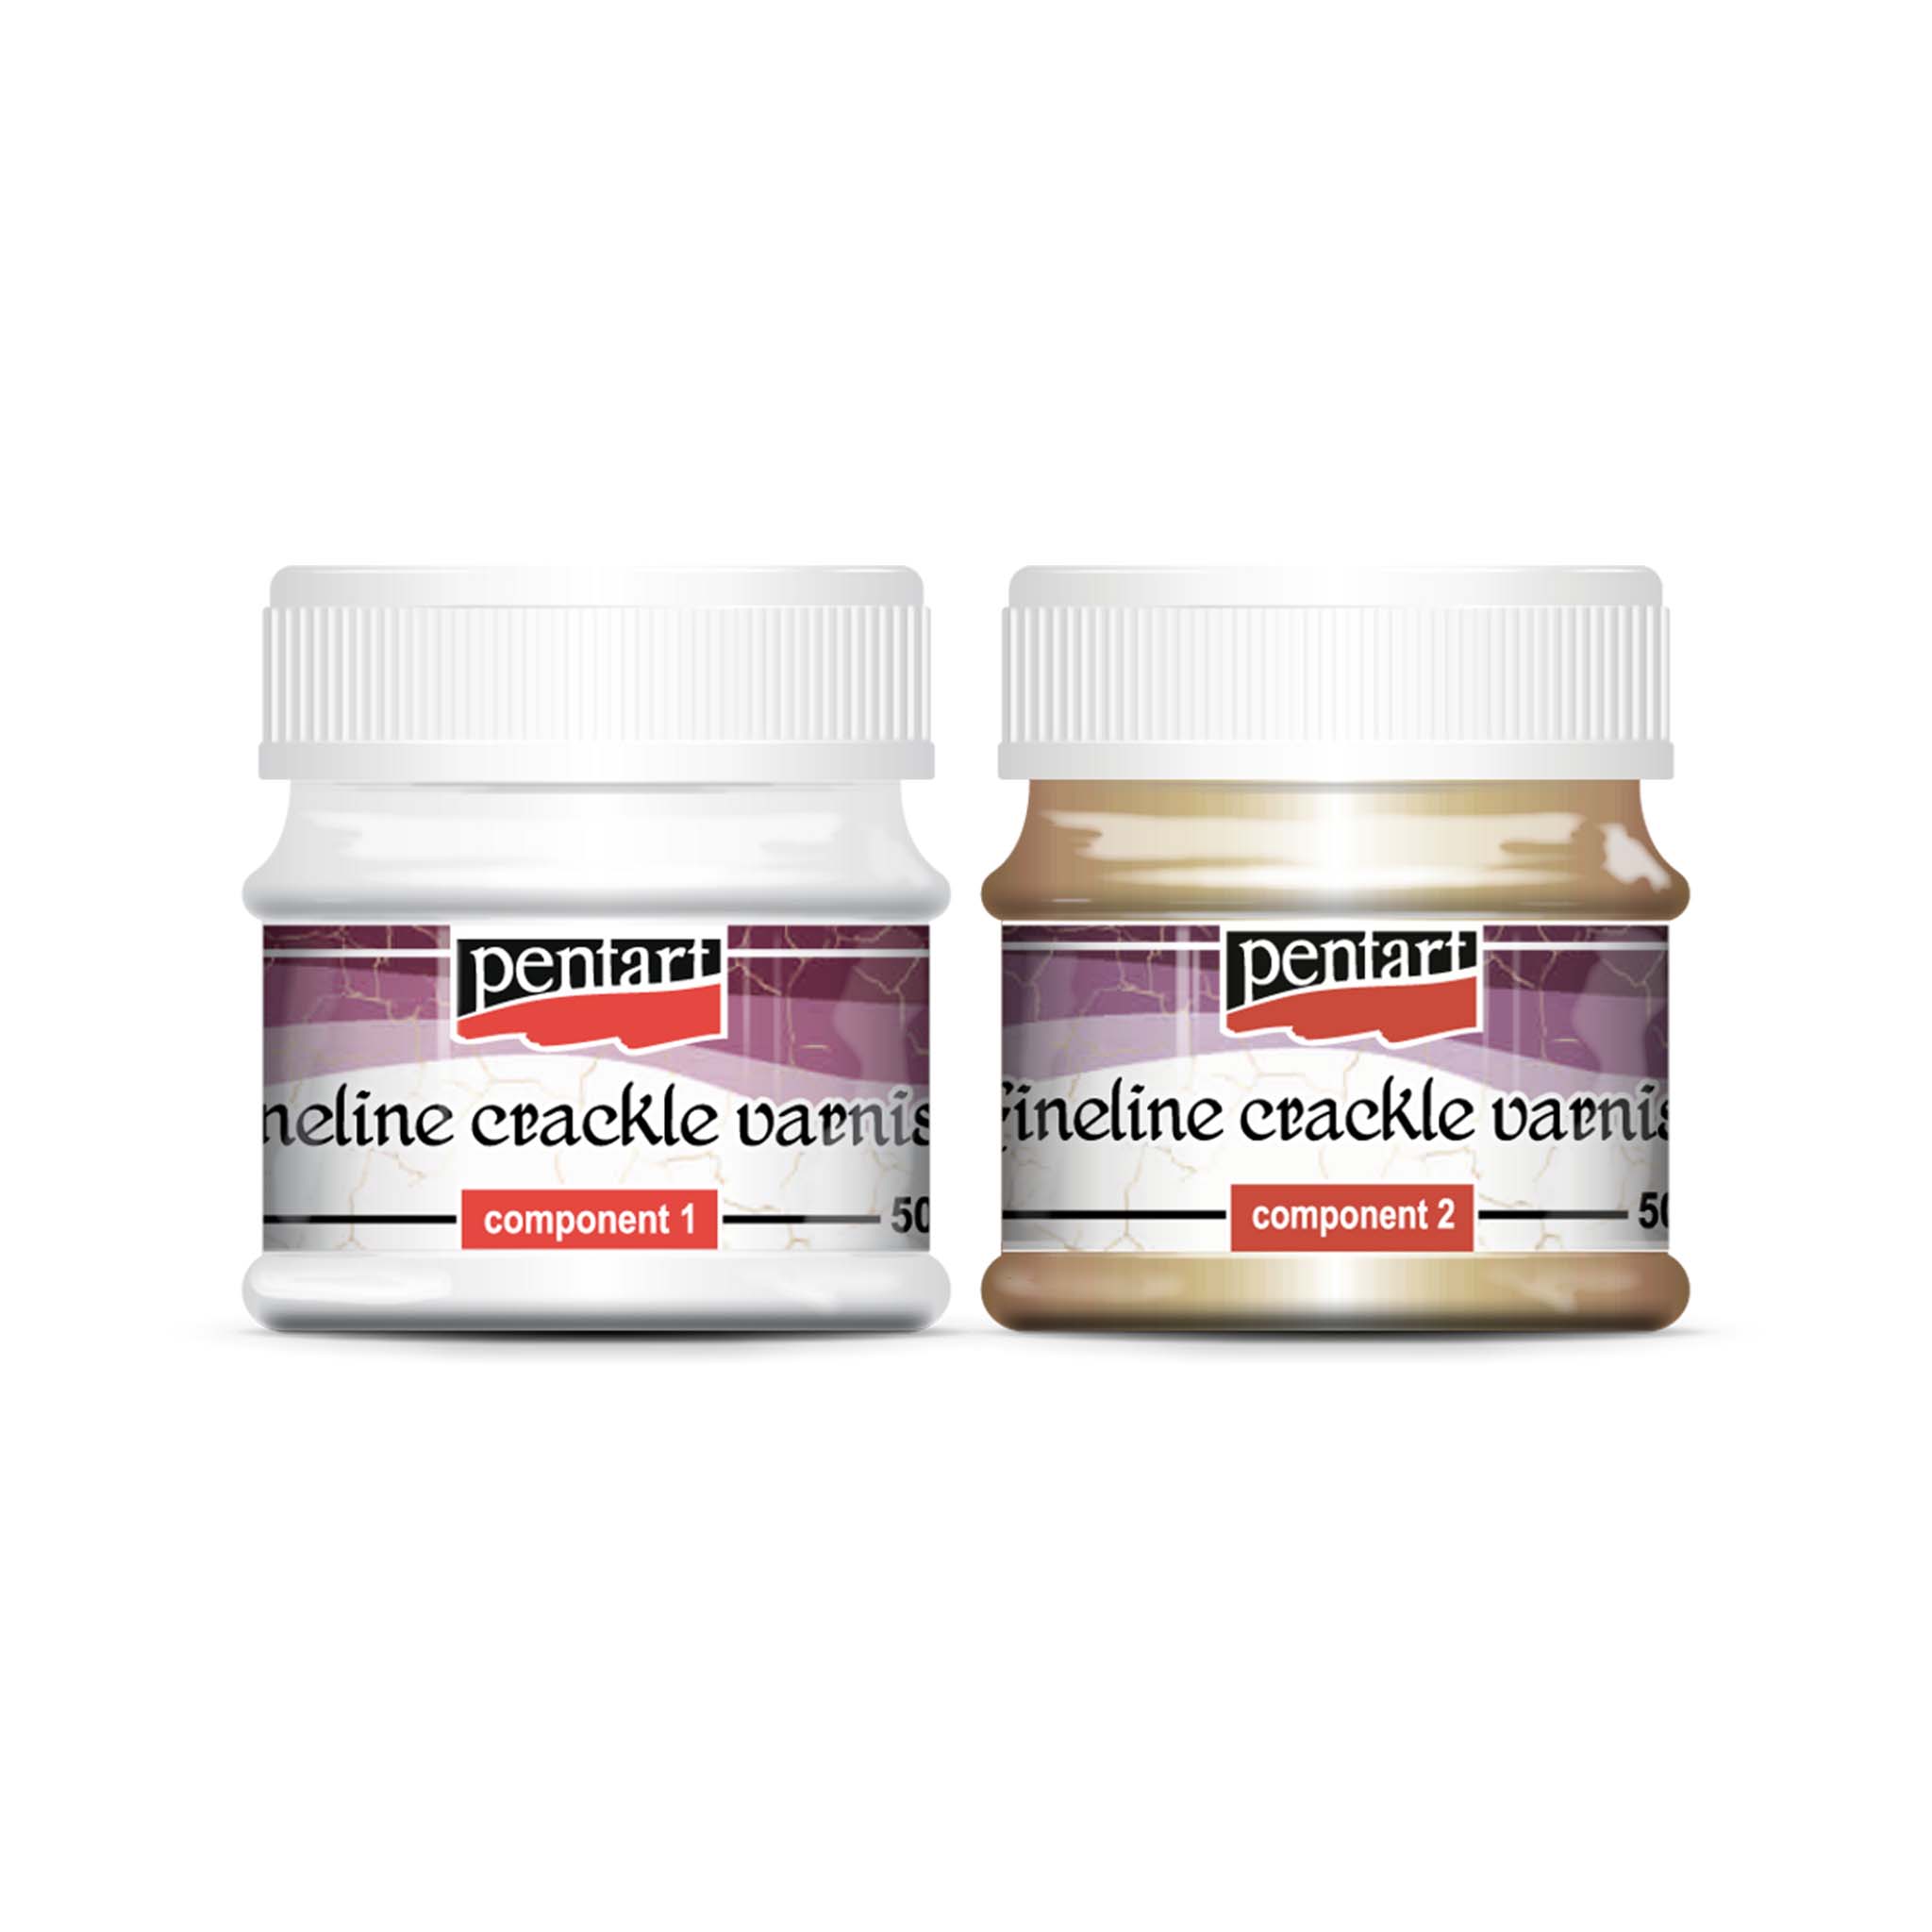 Two 50ml containers of Pentart's Fineline Crackle Varnish are against a white background. The left container is Component 1 and the right container is Component 2.